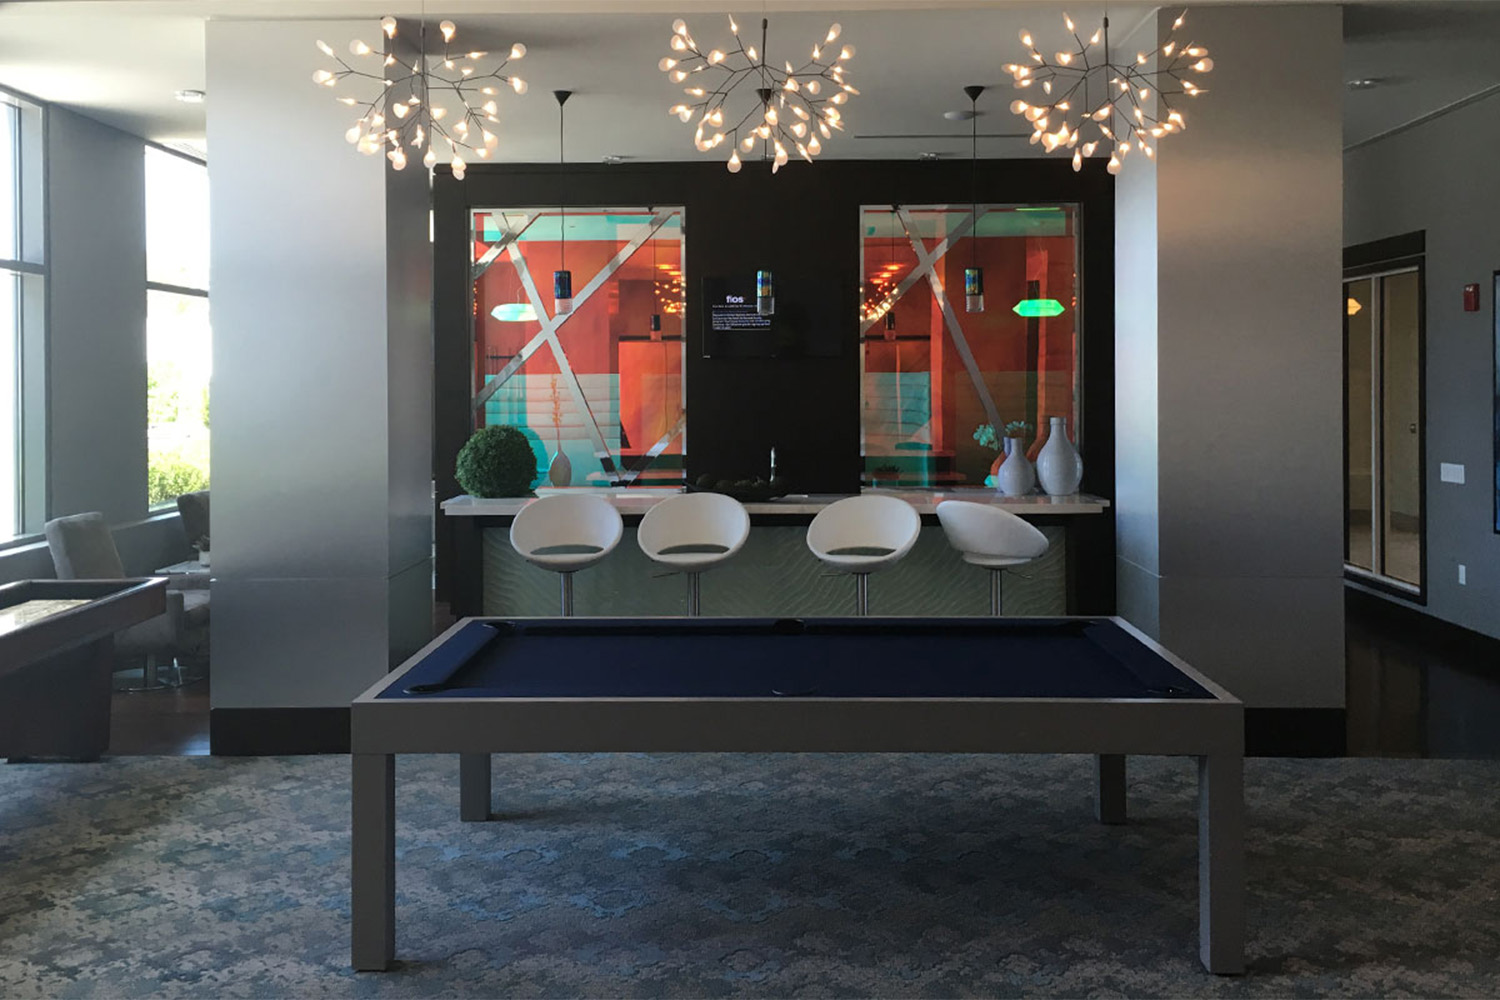 Recreation room, with pool table, artful lighting fixtures, and bar area